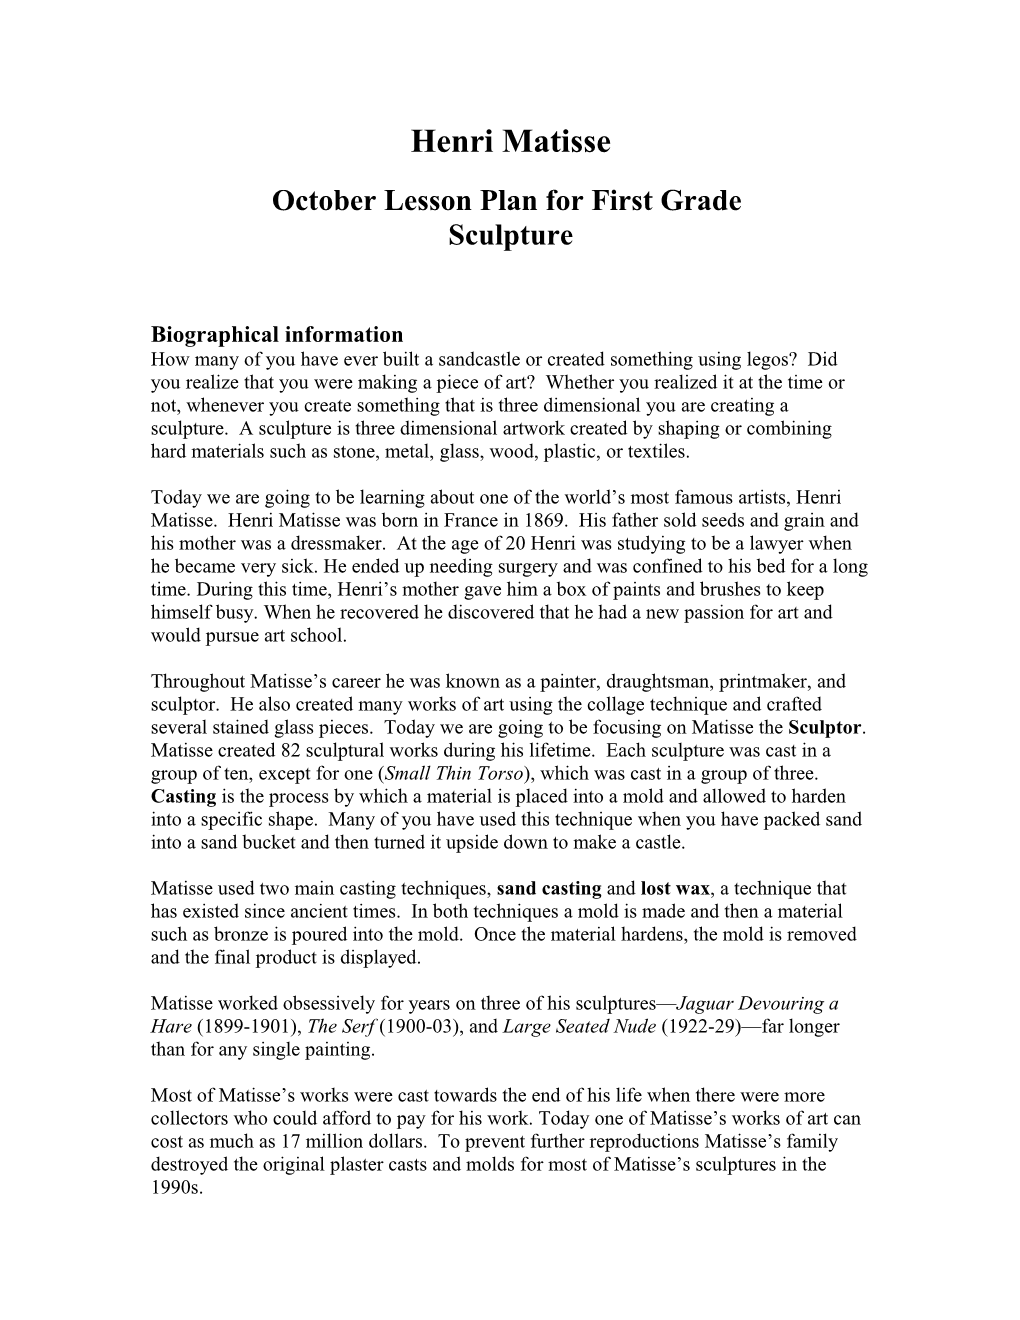 October Lesson Plan for First Grade